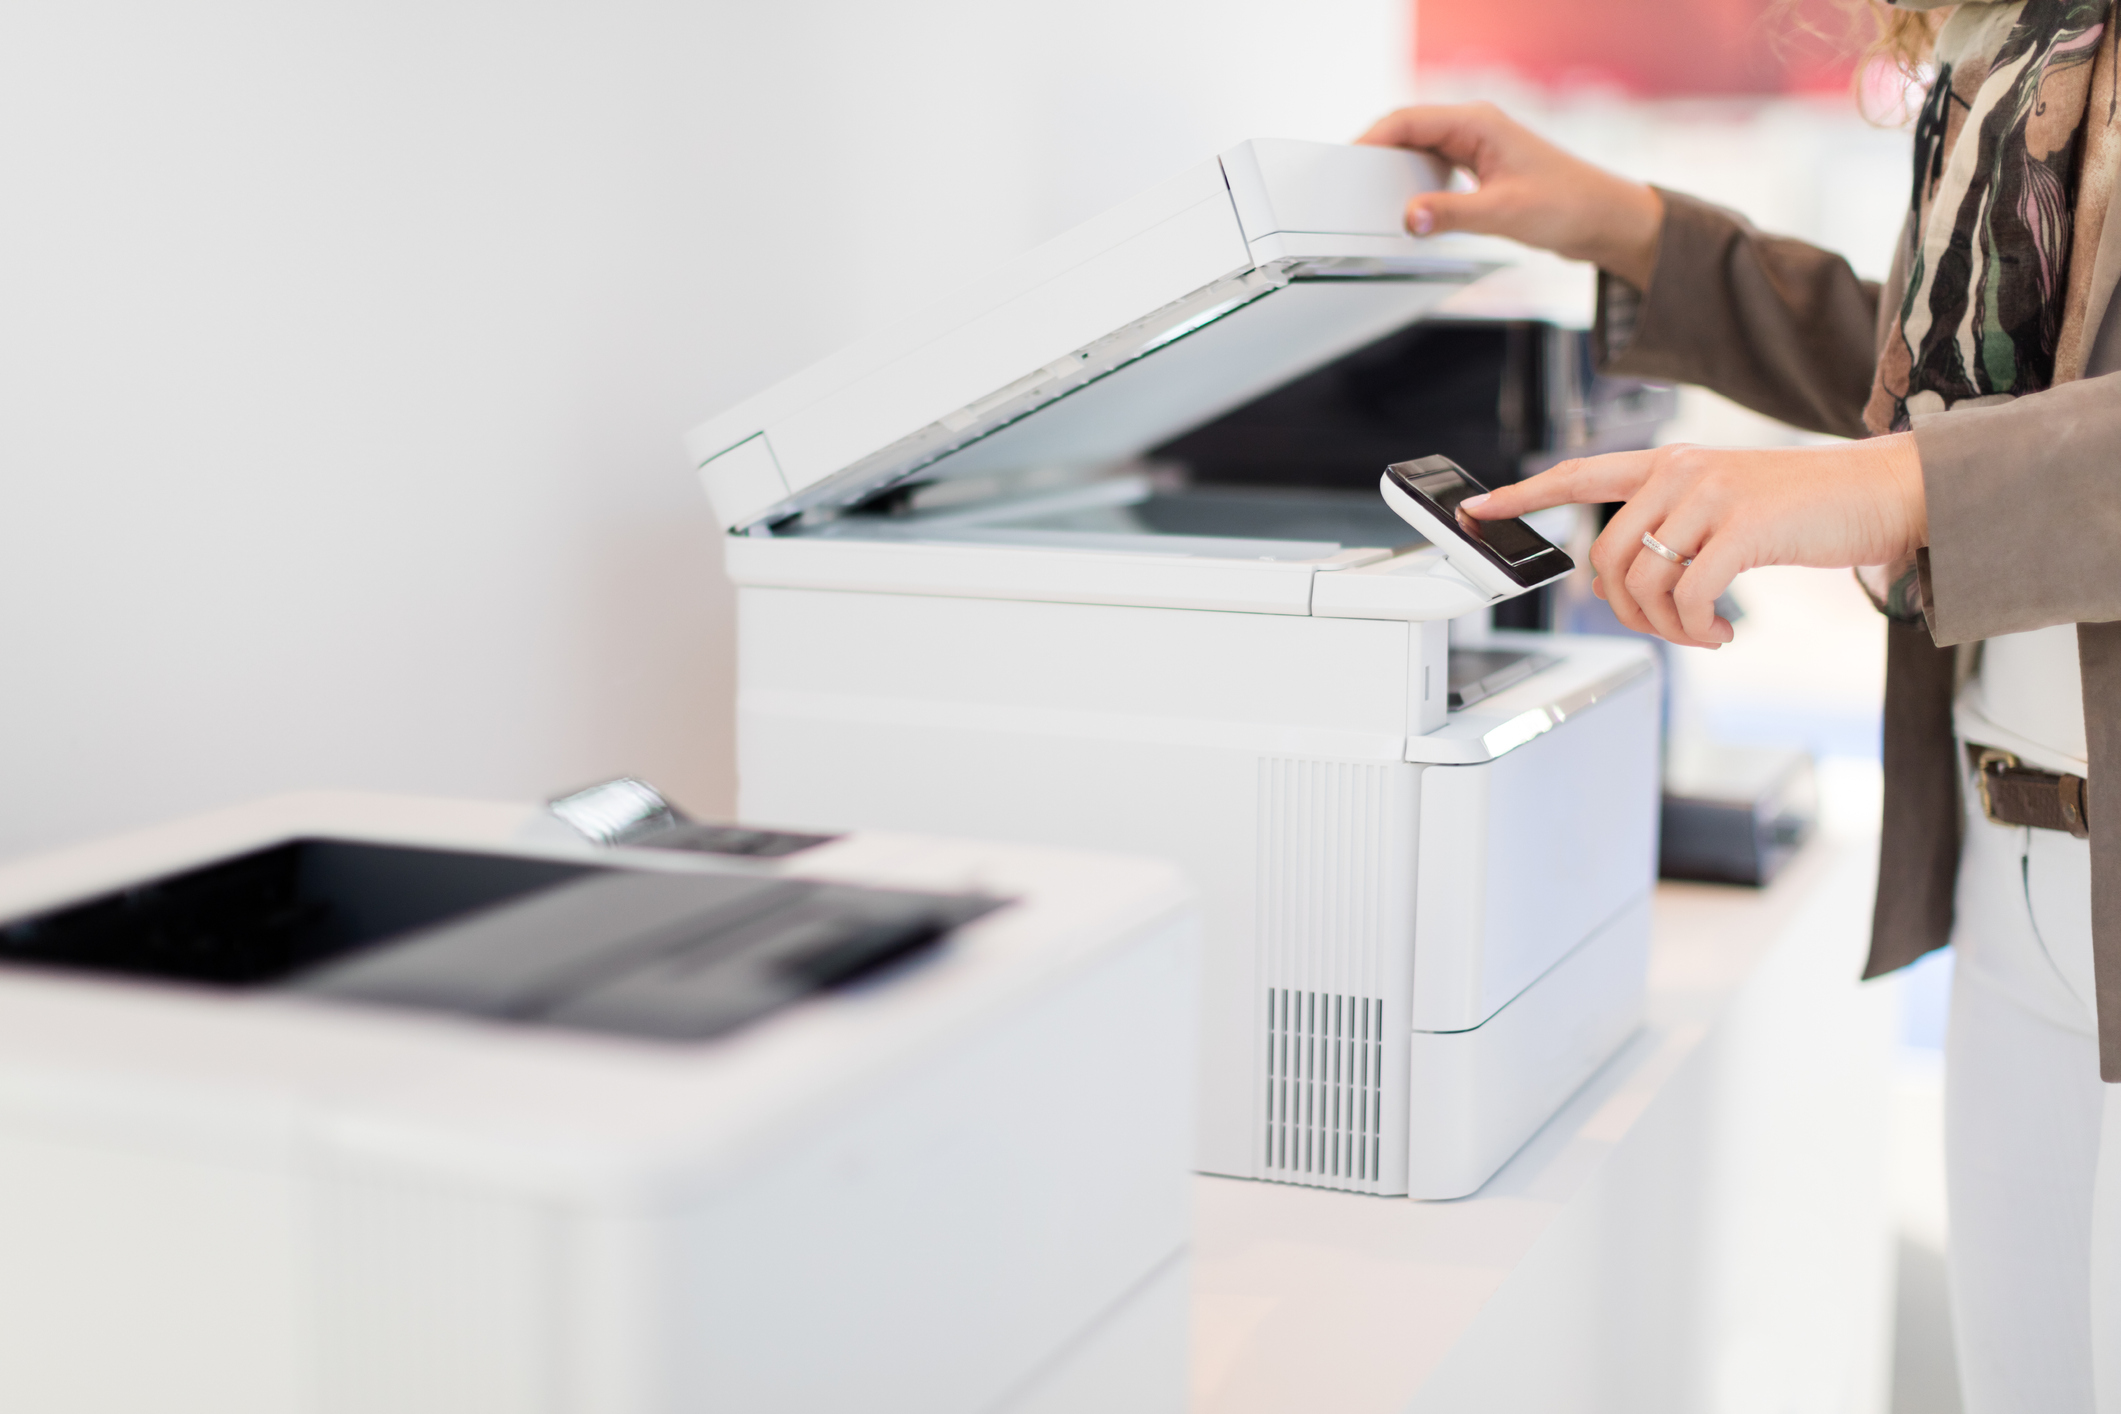 proza snor Indringing Printers & scanners | ID.nl